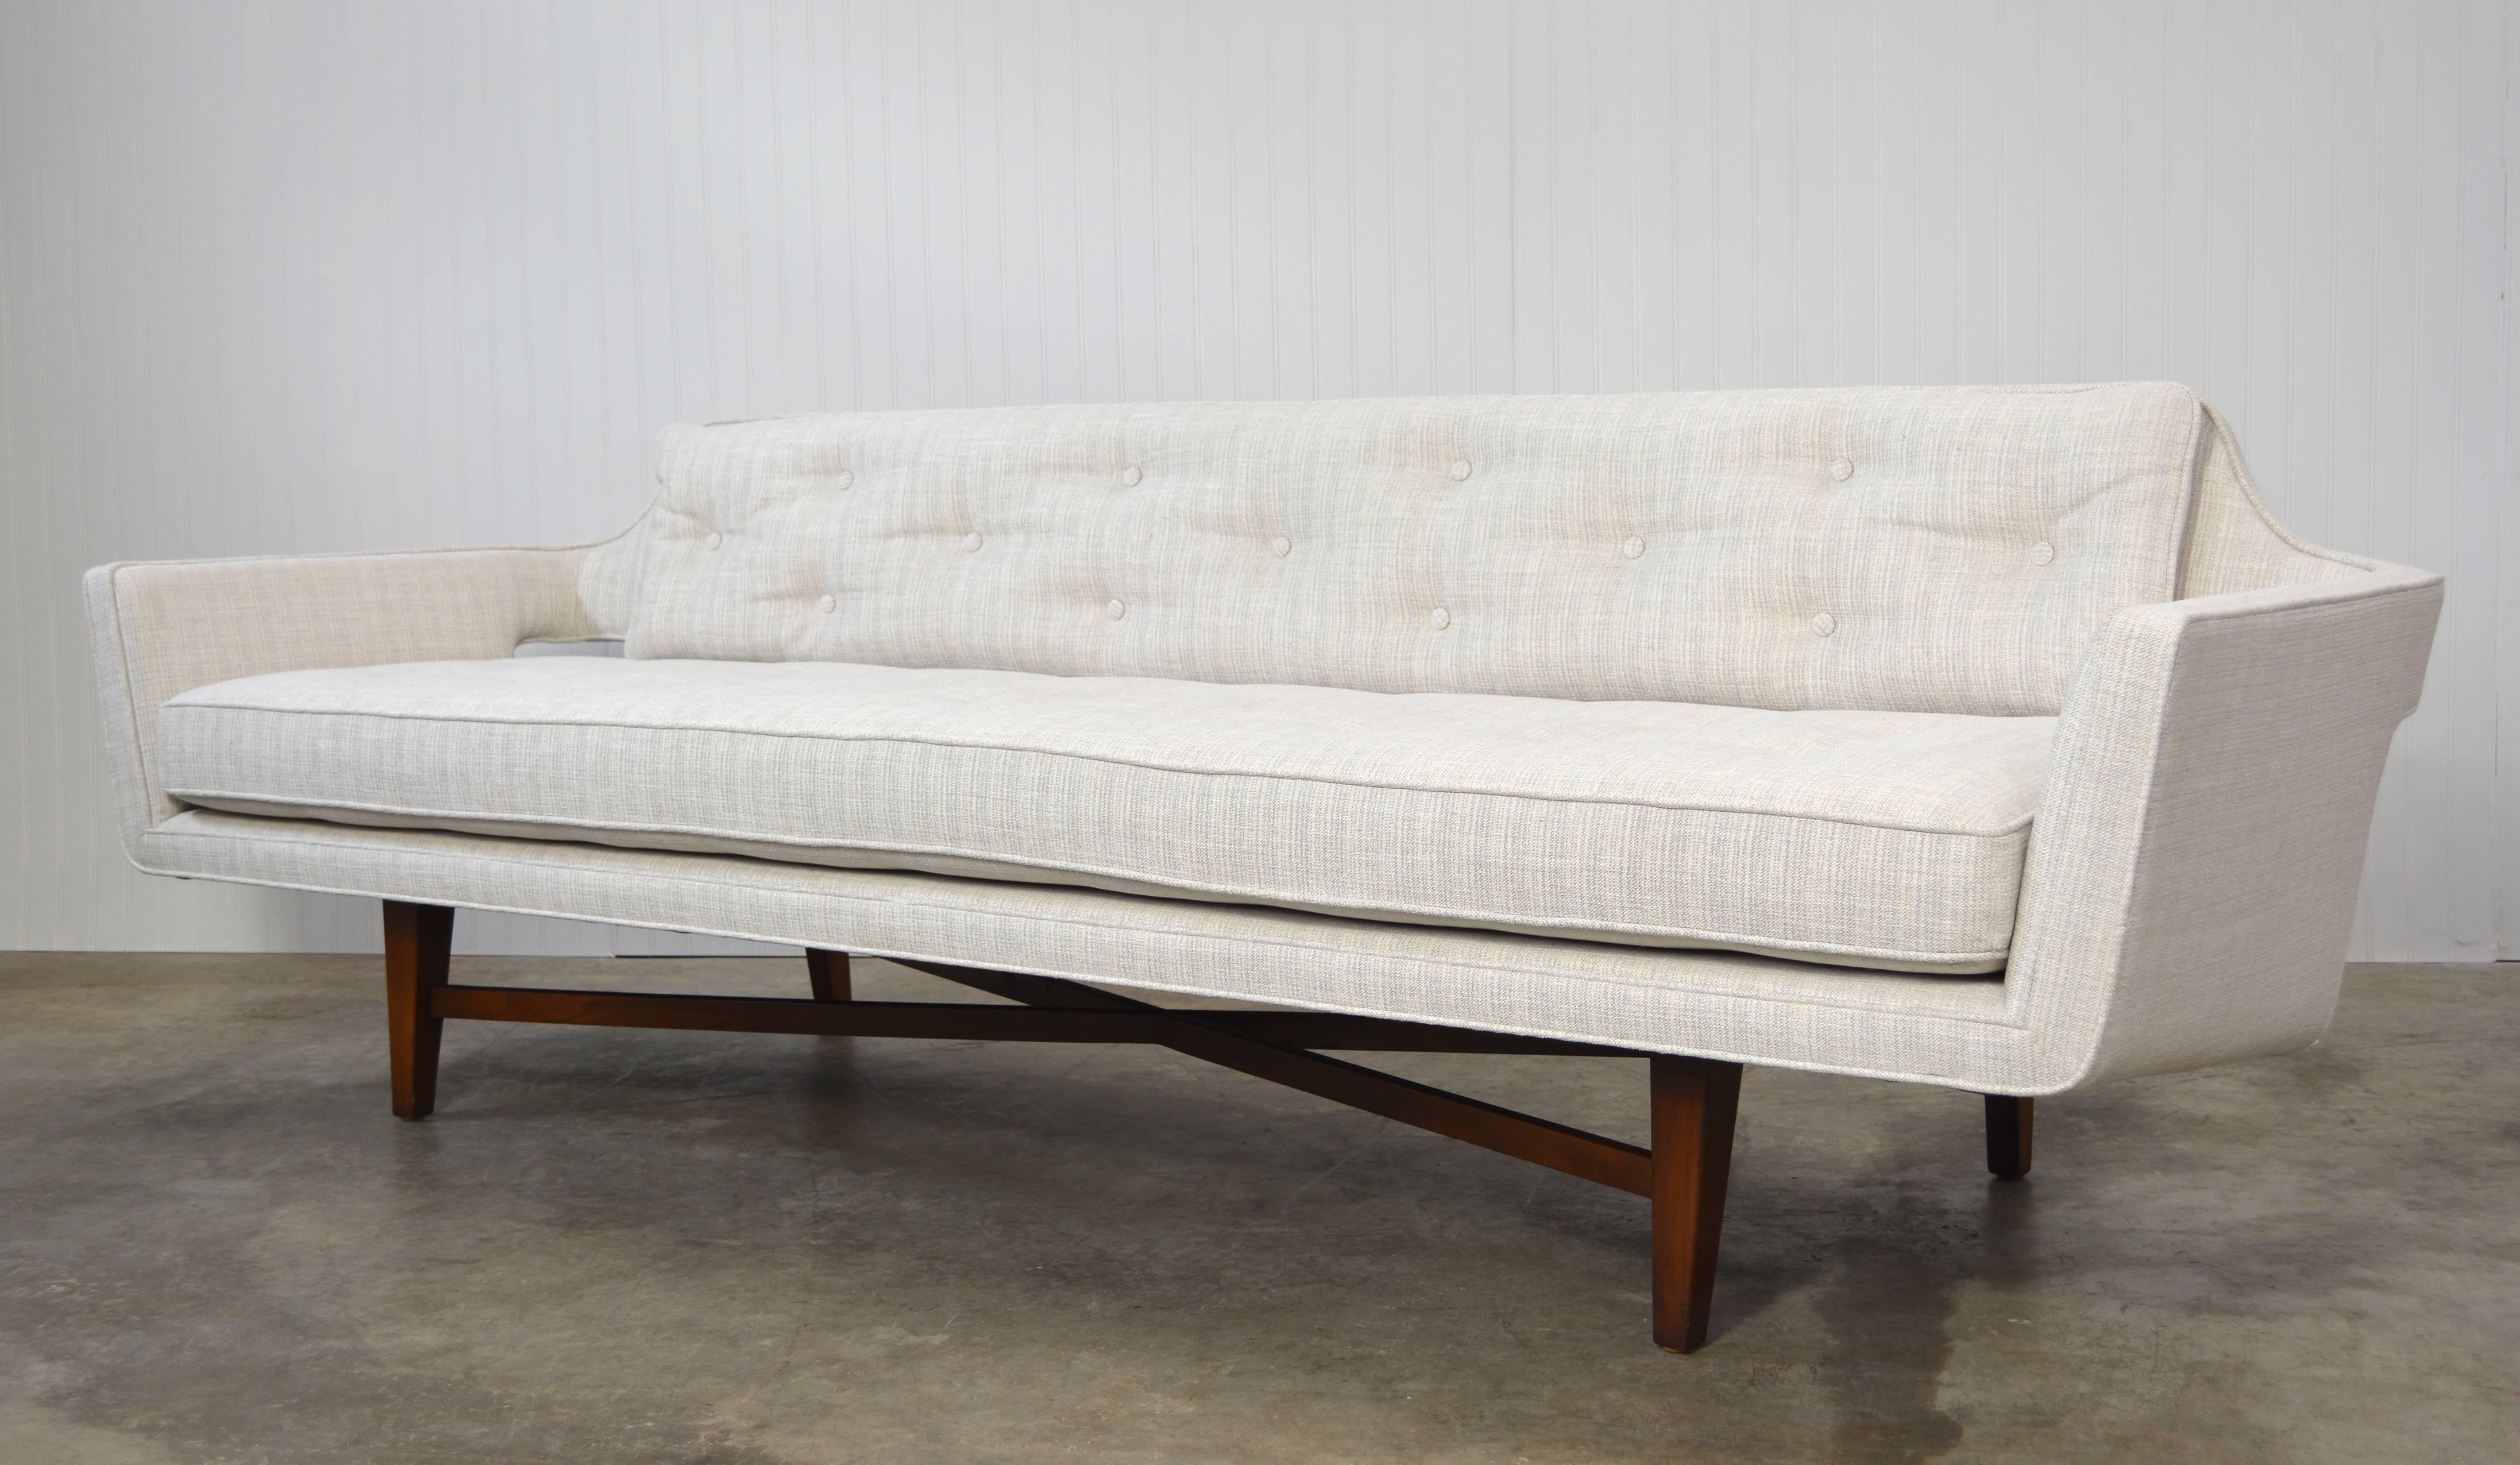 Pair of Sofas by Edward Wormley for Dunbar In Excellent Condition For Sale In Loves Park, IL